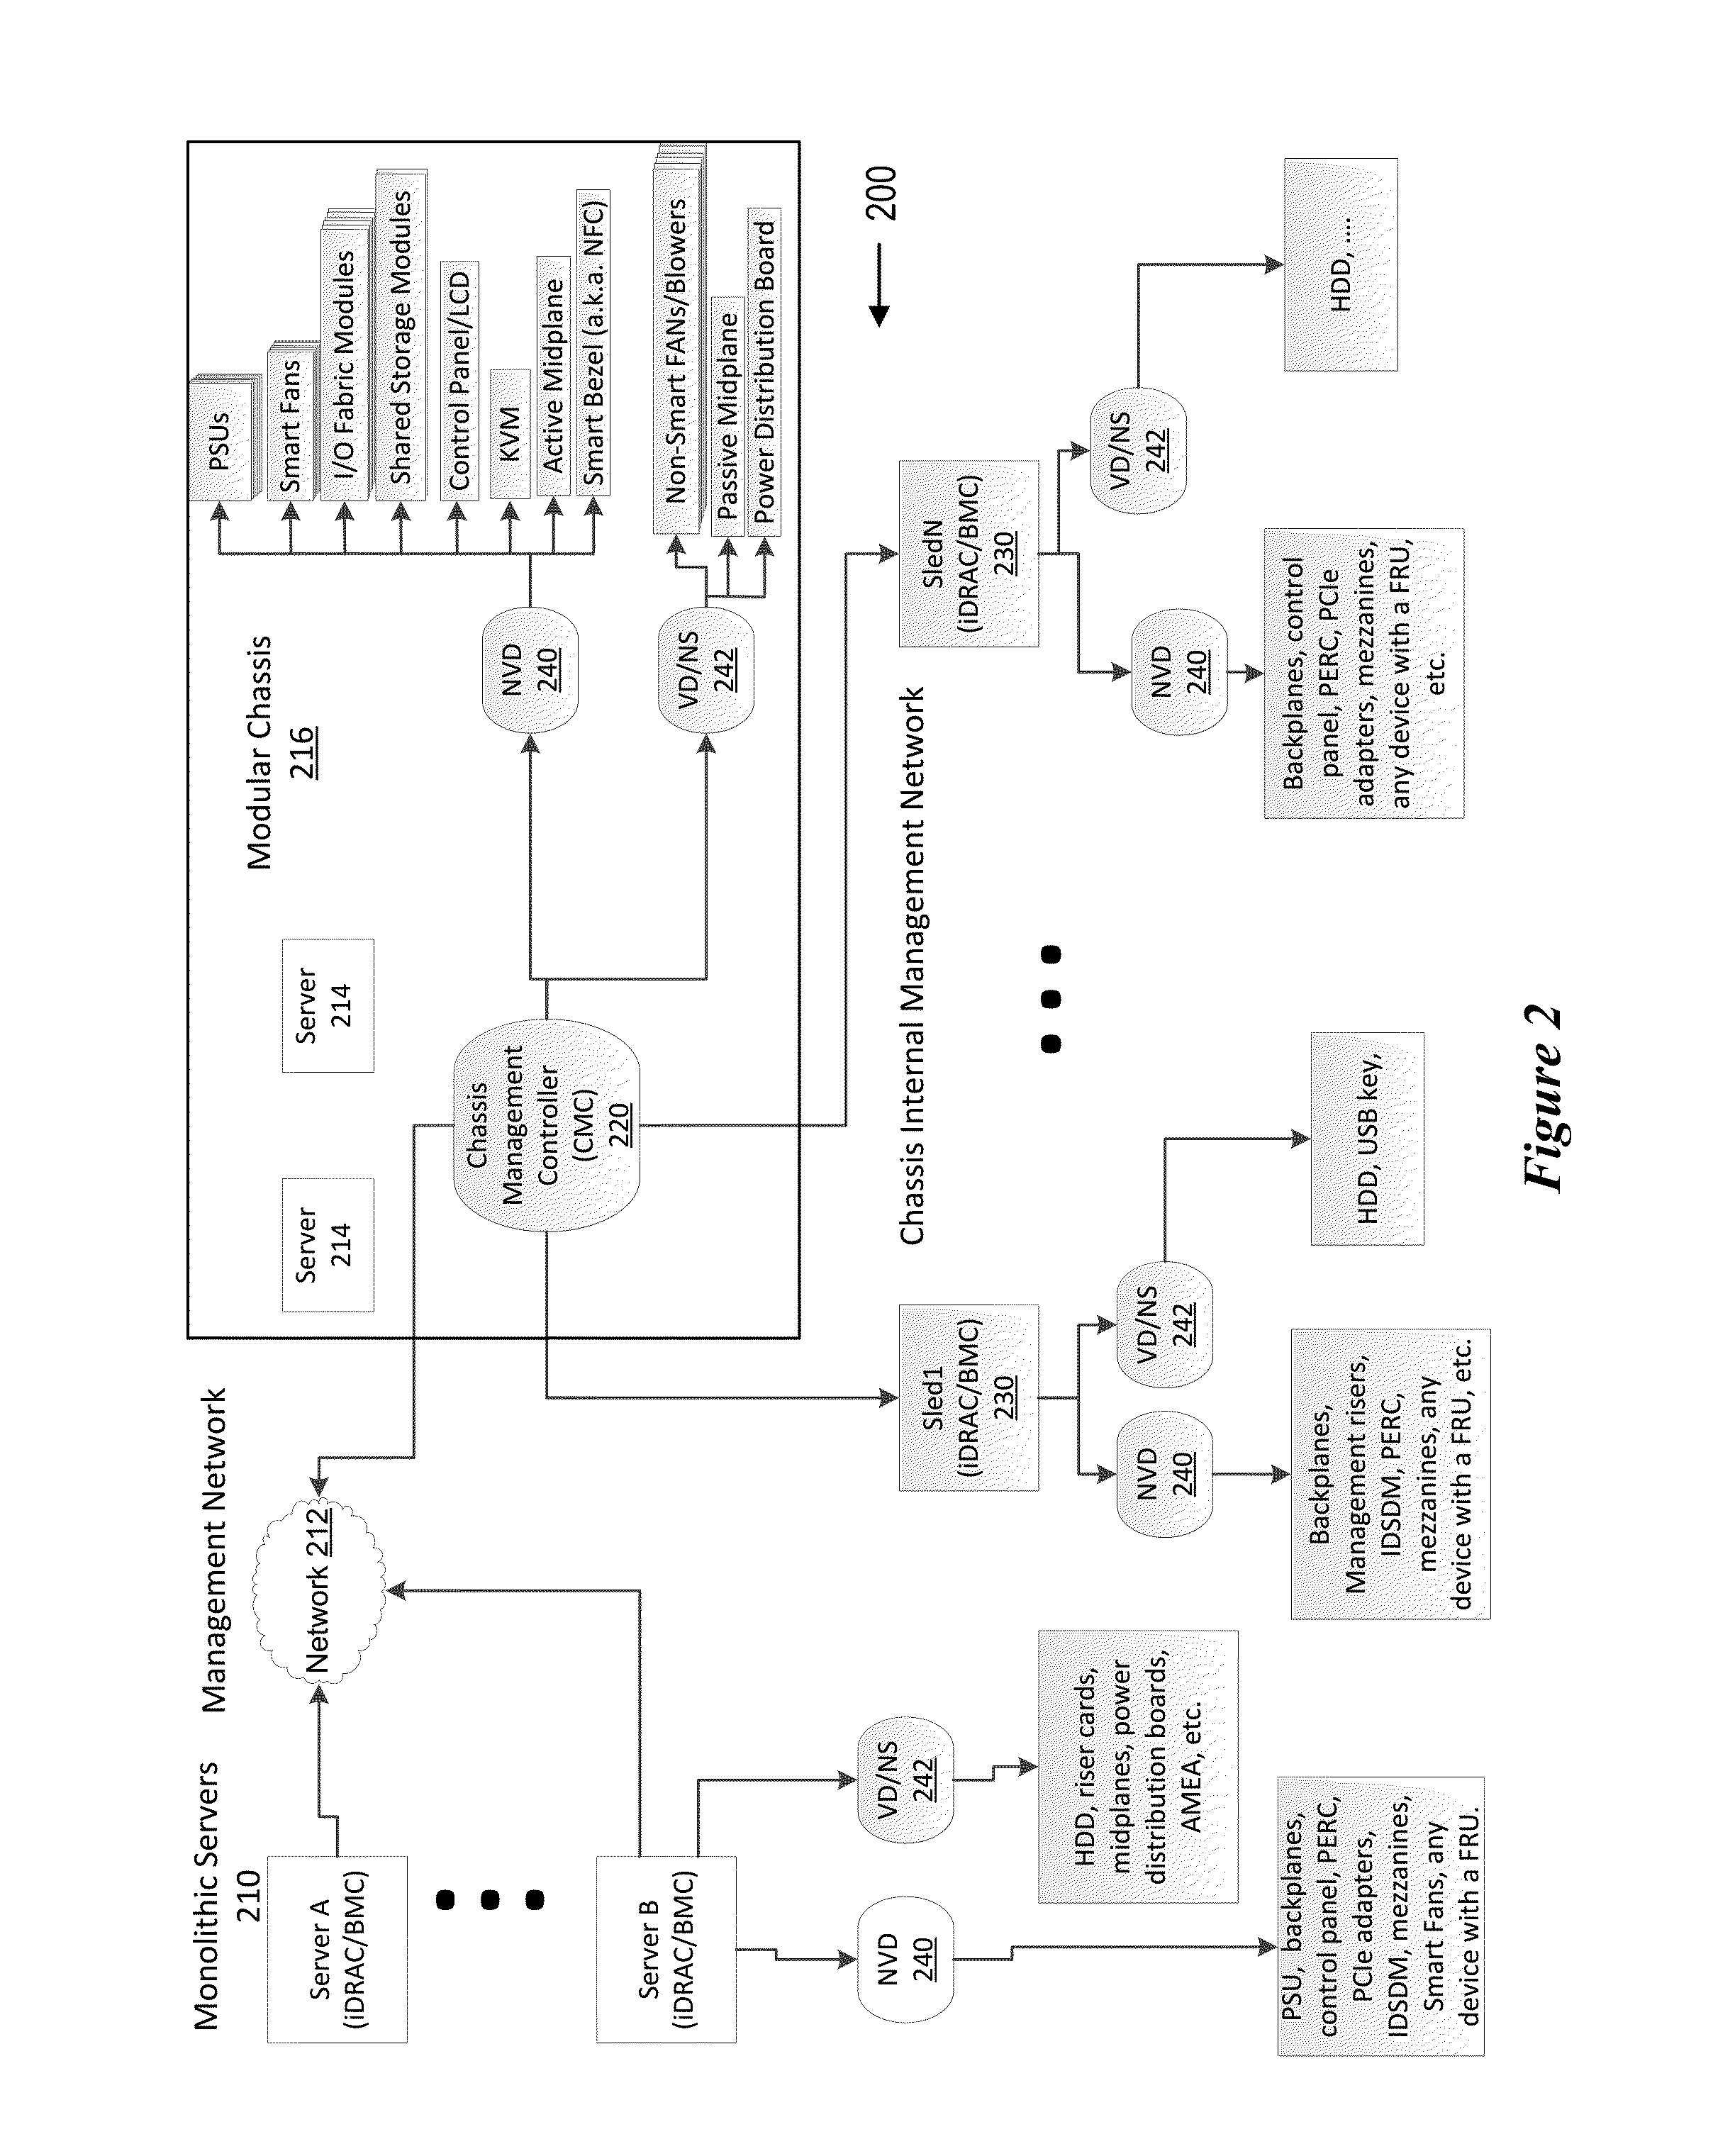 Distributed Enterprise Equipment Inventory Location System